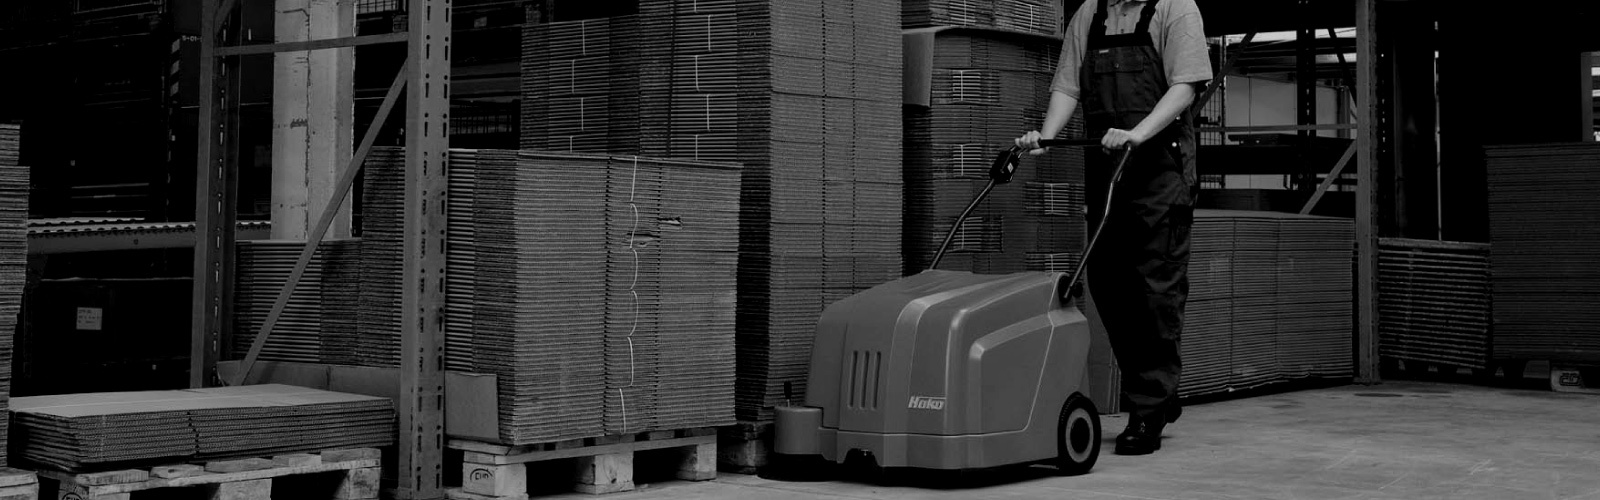 14 Questions About Cleaning Warehouses Using Industrial Sweepers